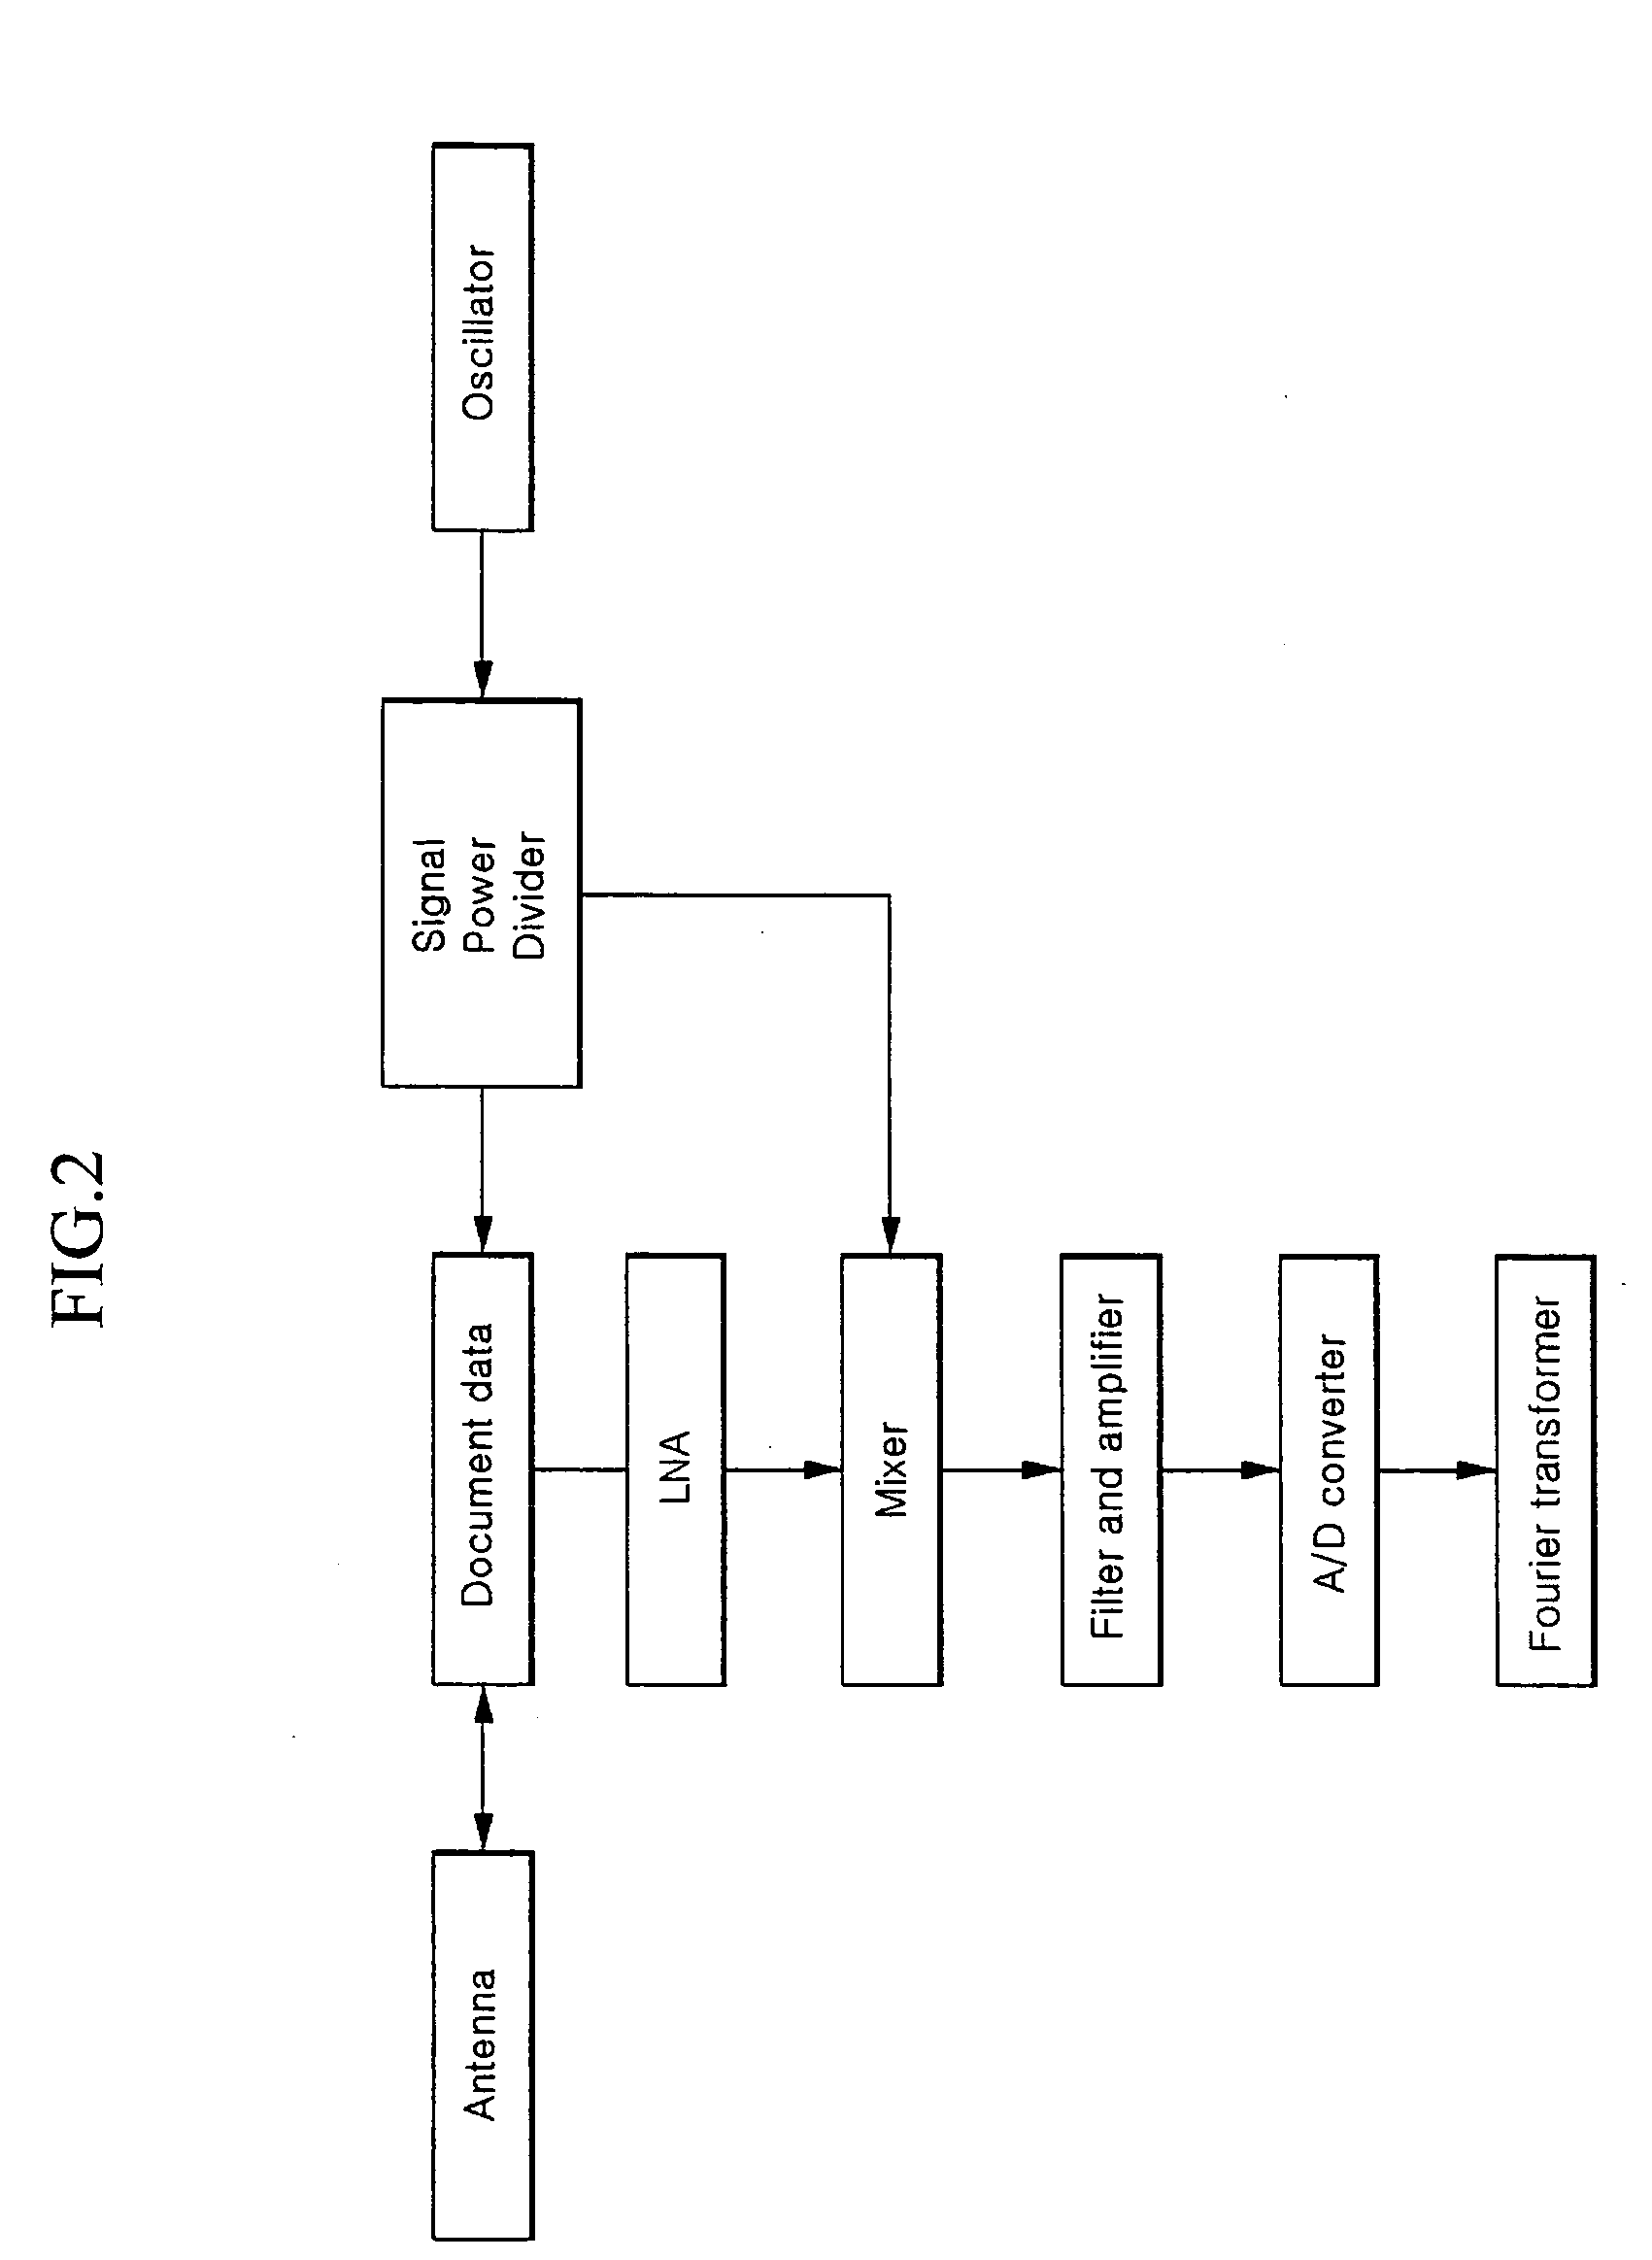 Wireless heart rate sensing system and method